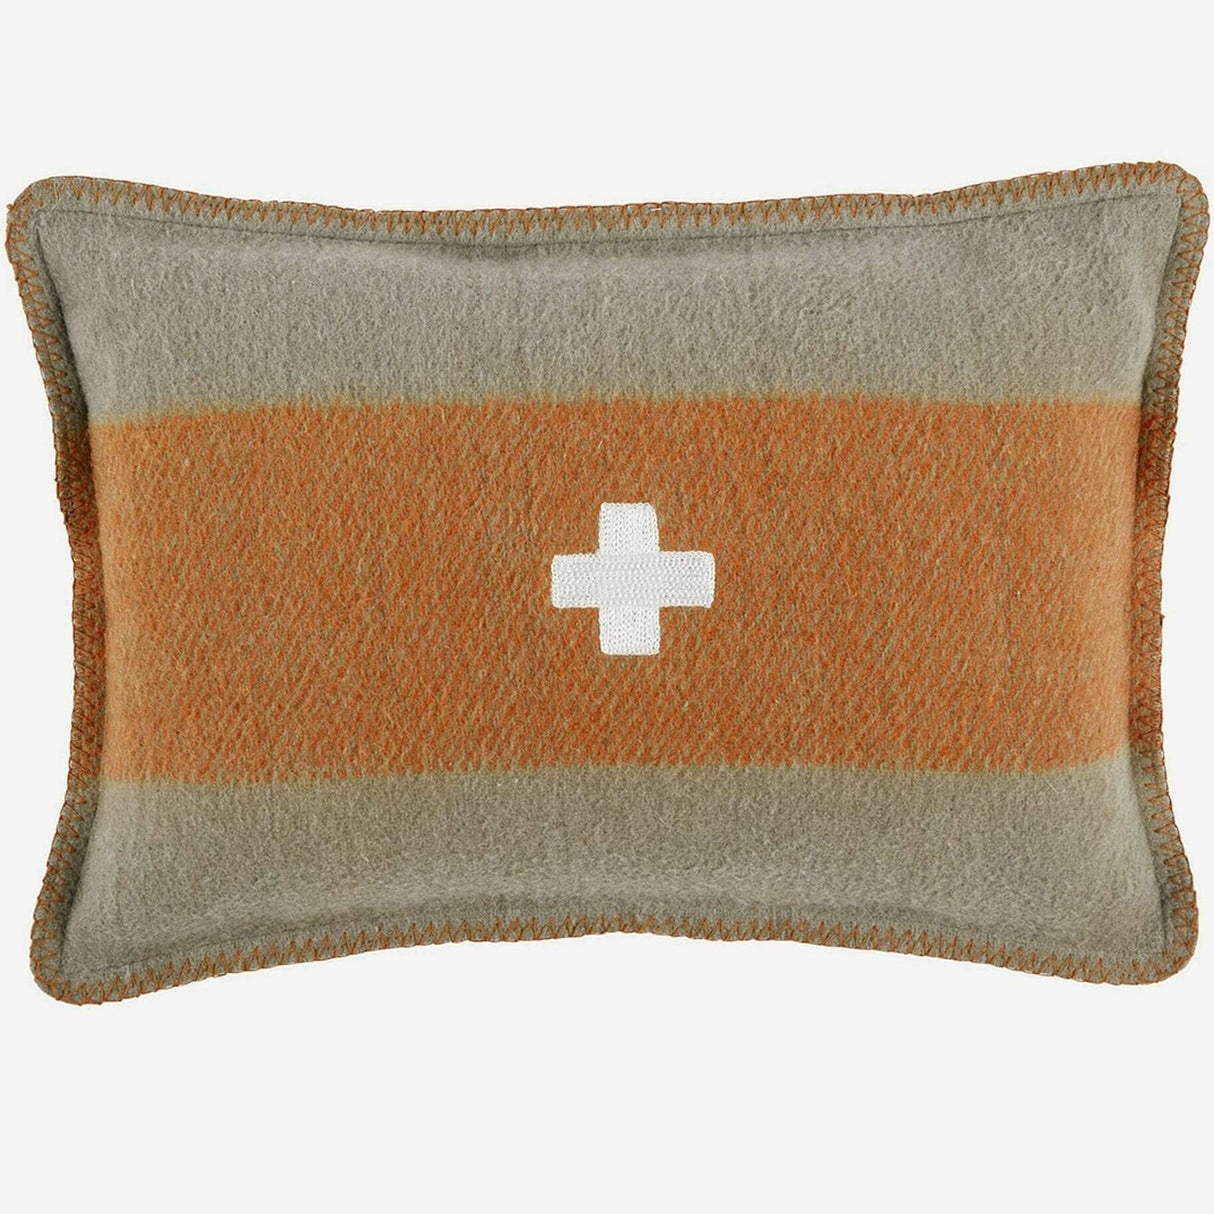 BoBo Intriguing Objects Swiss Army Pillow Cover Pillow & Decor bobo-BI-2537Brown